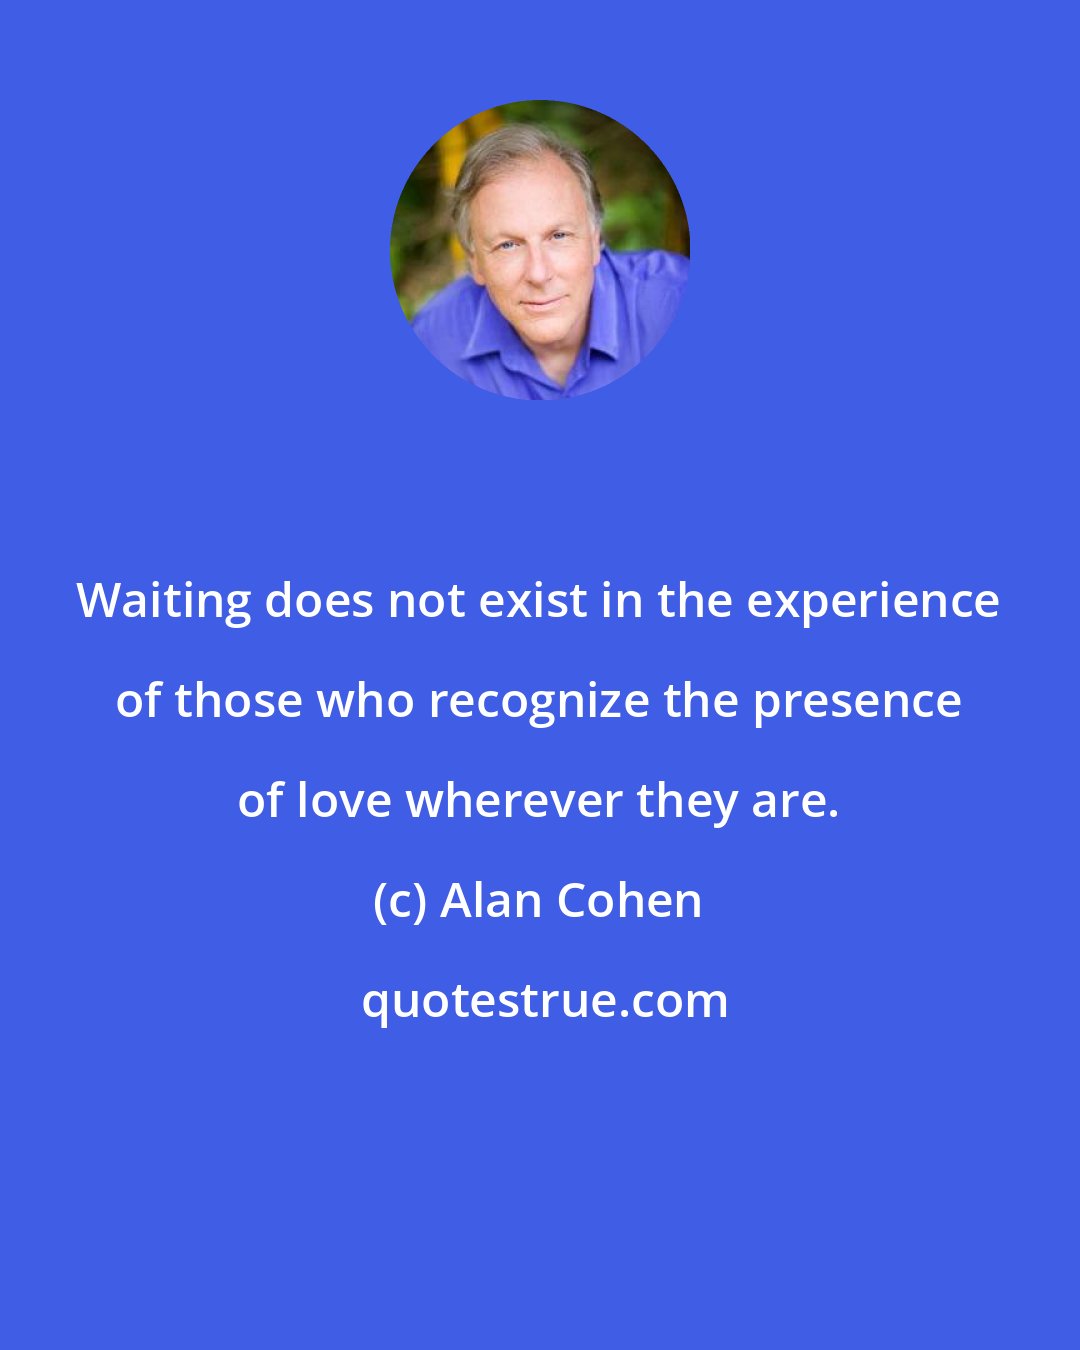 Alan Cohen: Waiting does not exist in the experience of those who recognize the presence of love wherever they are.